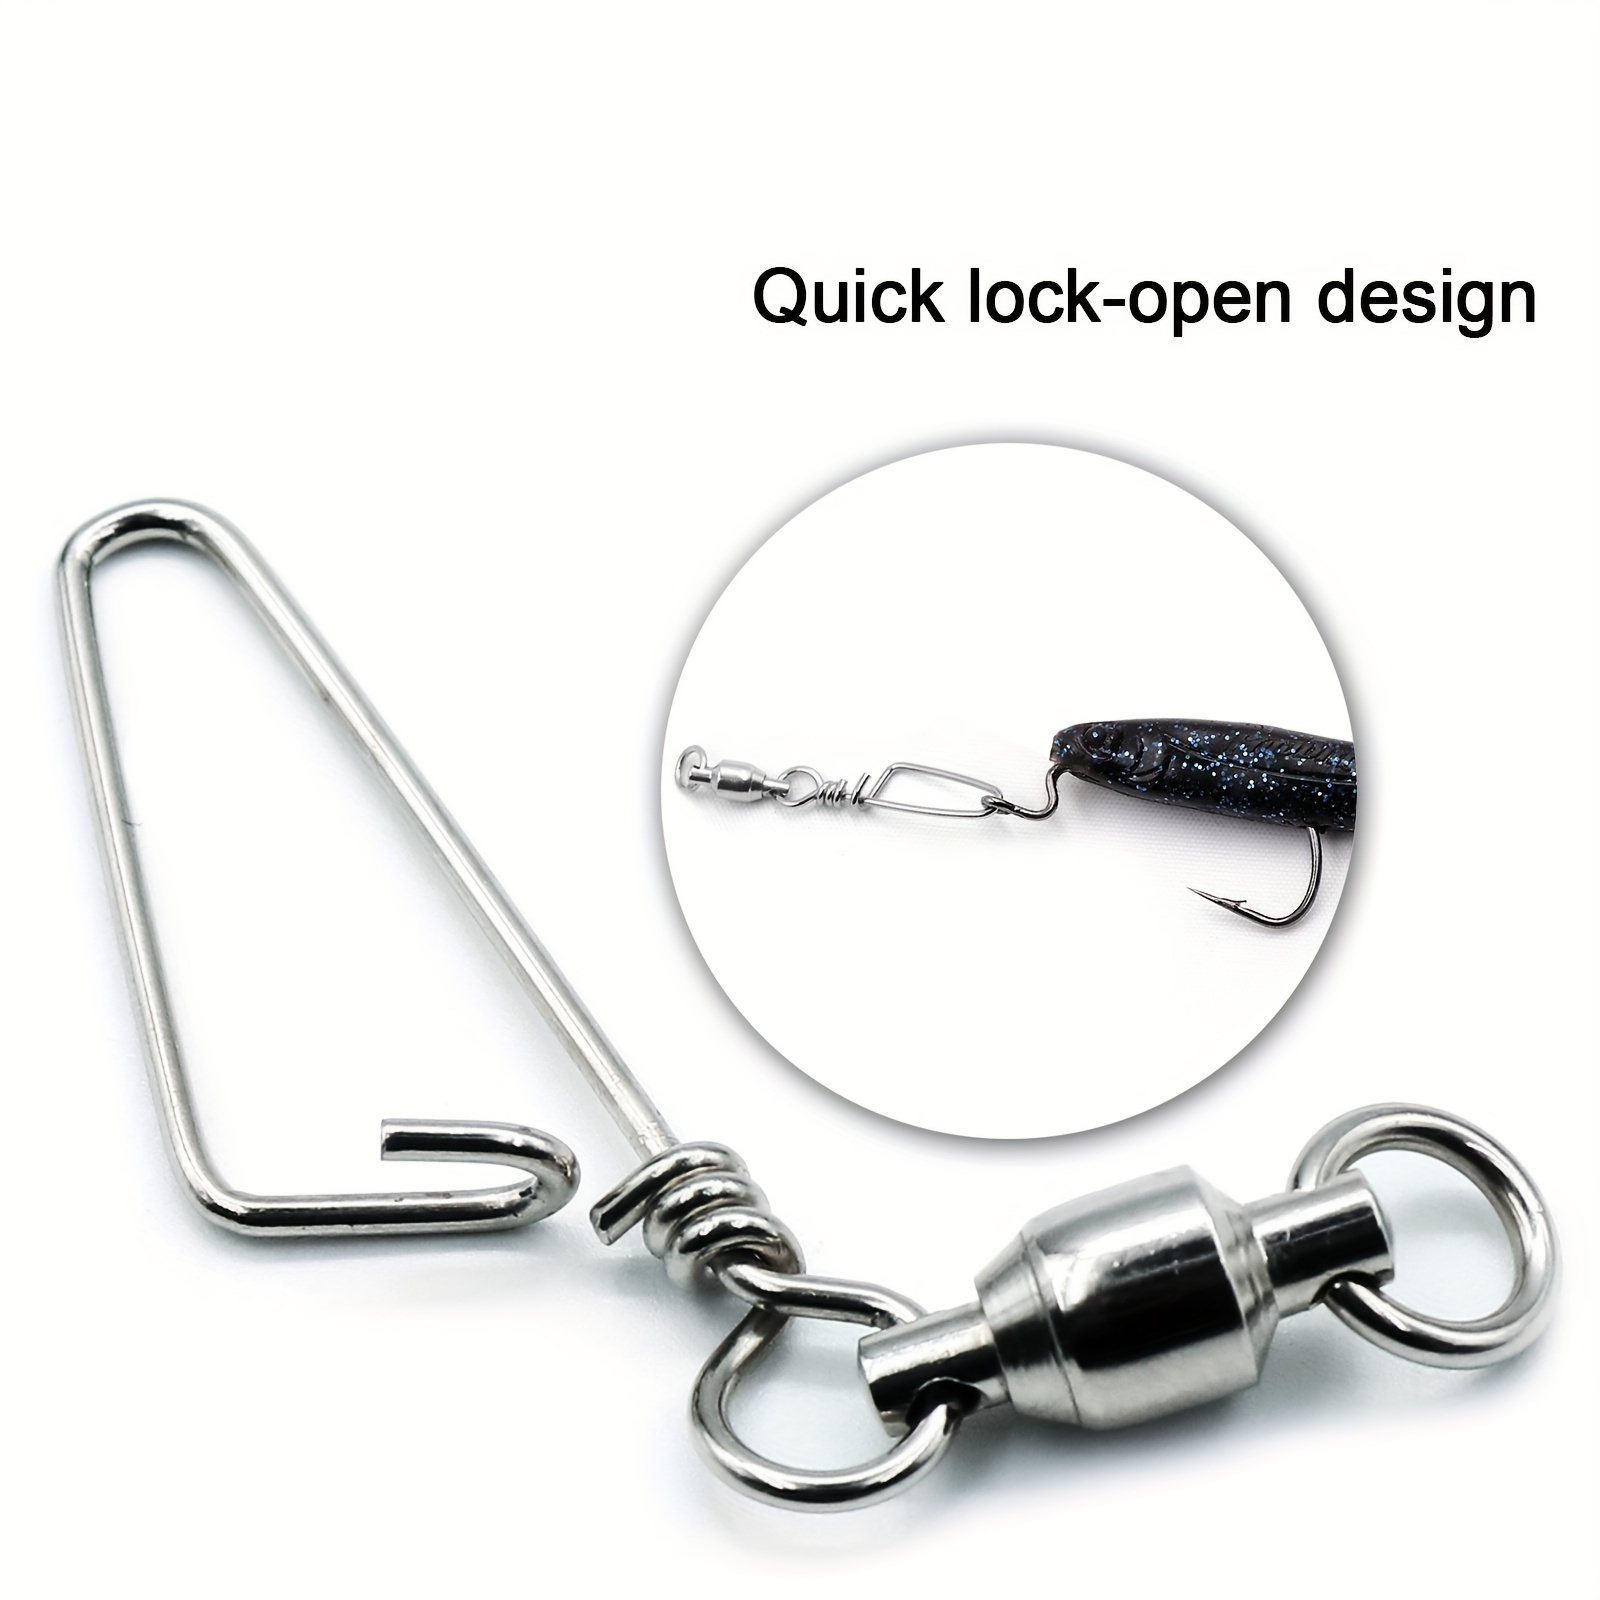 20pcs Fishing Snap Swivel With Quick Lock B Type Clip, Convenient Tackle  For Freshwater And Saltwater Fishing